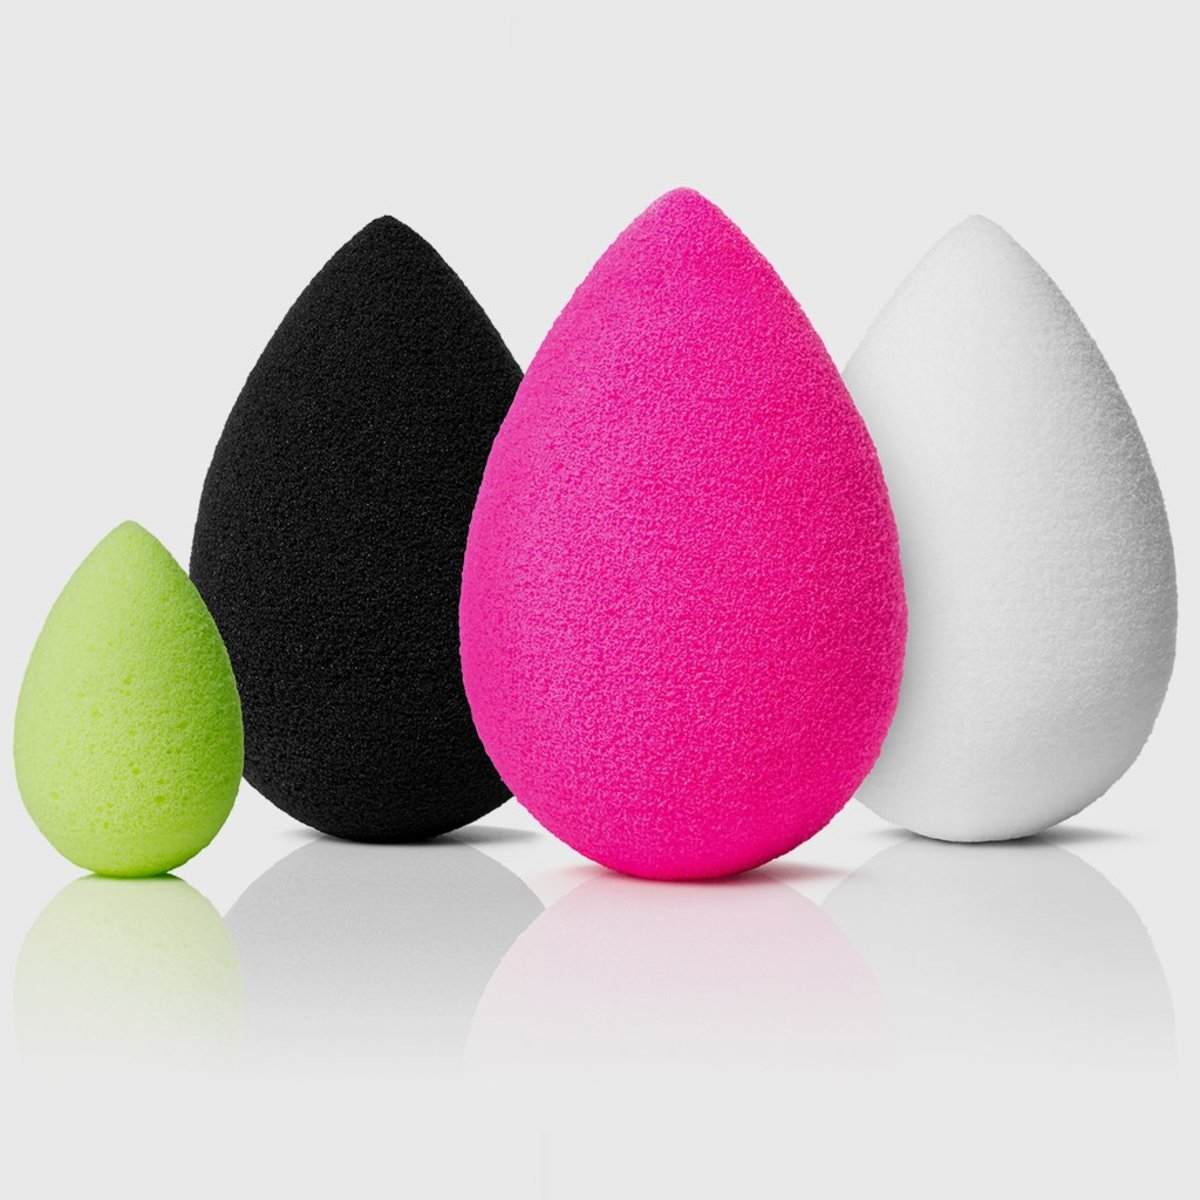 7 BeautyBlender Mistakes You're Probably Making